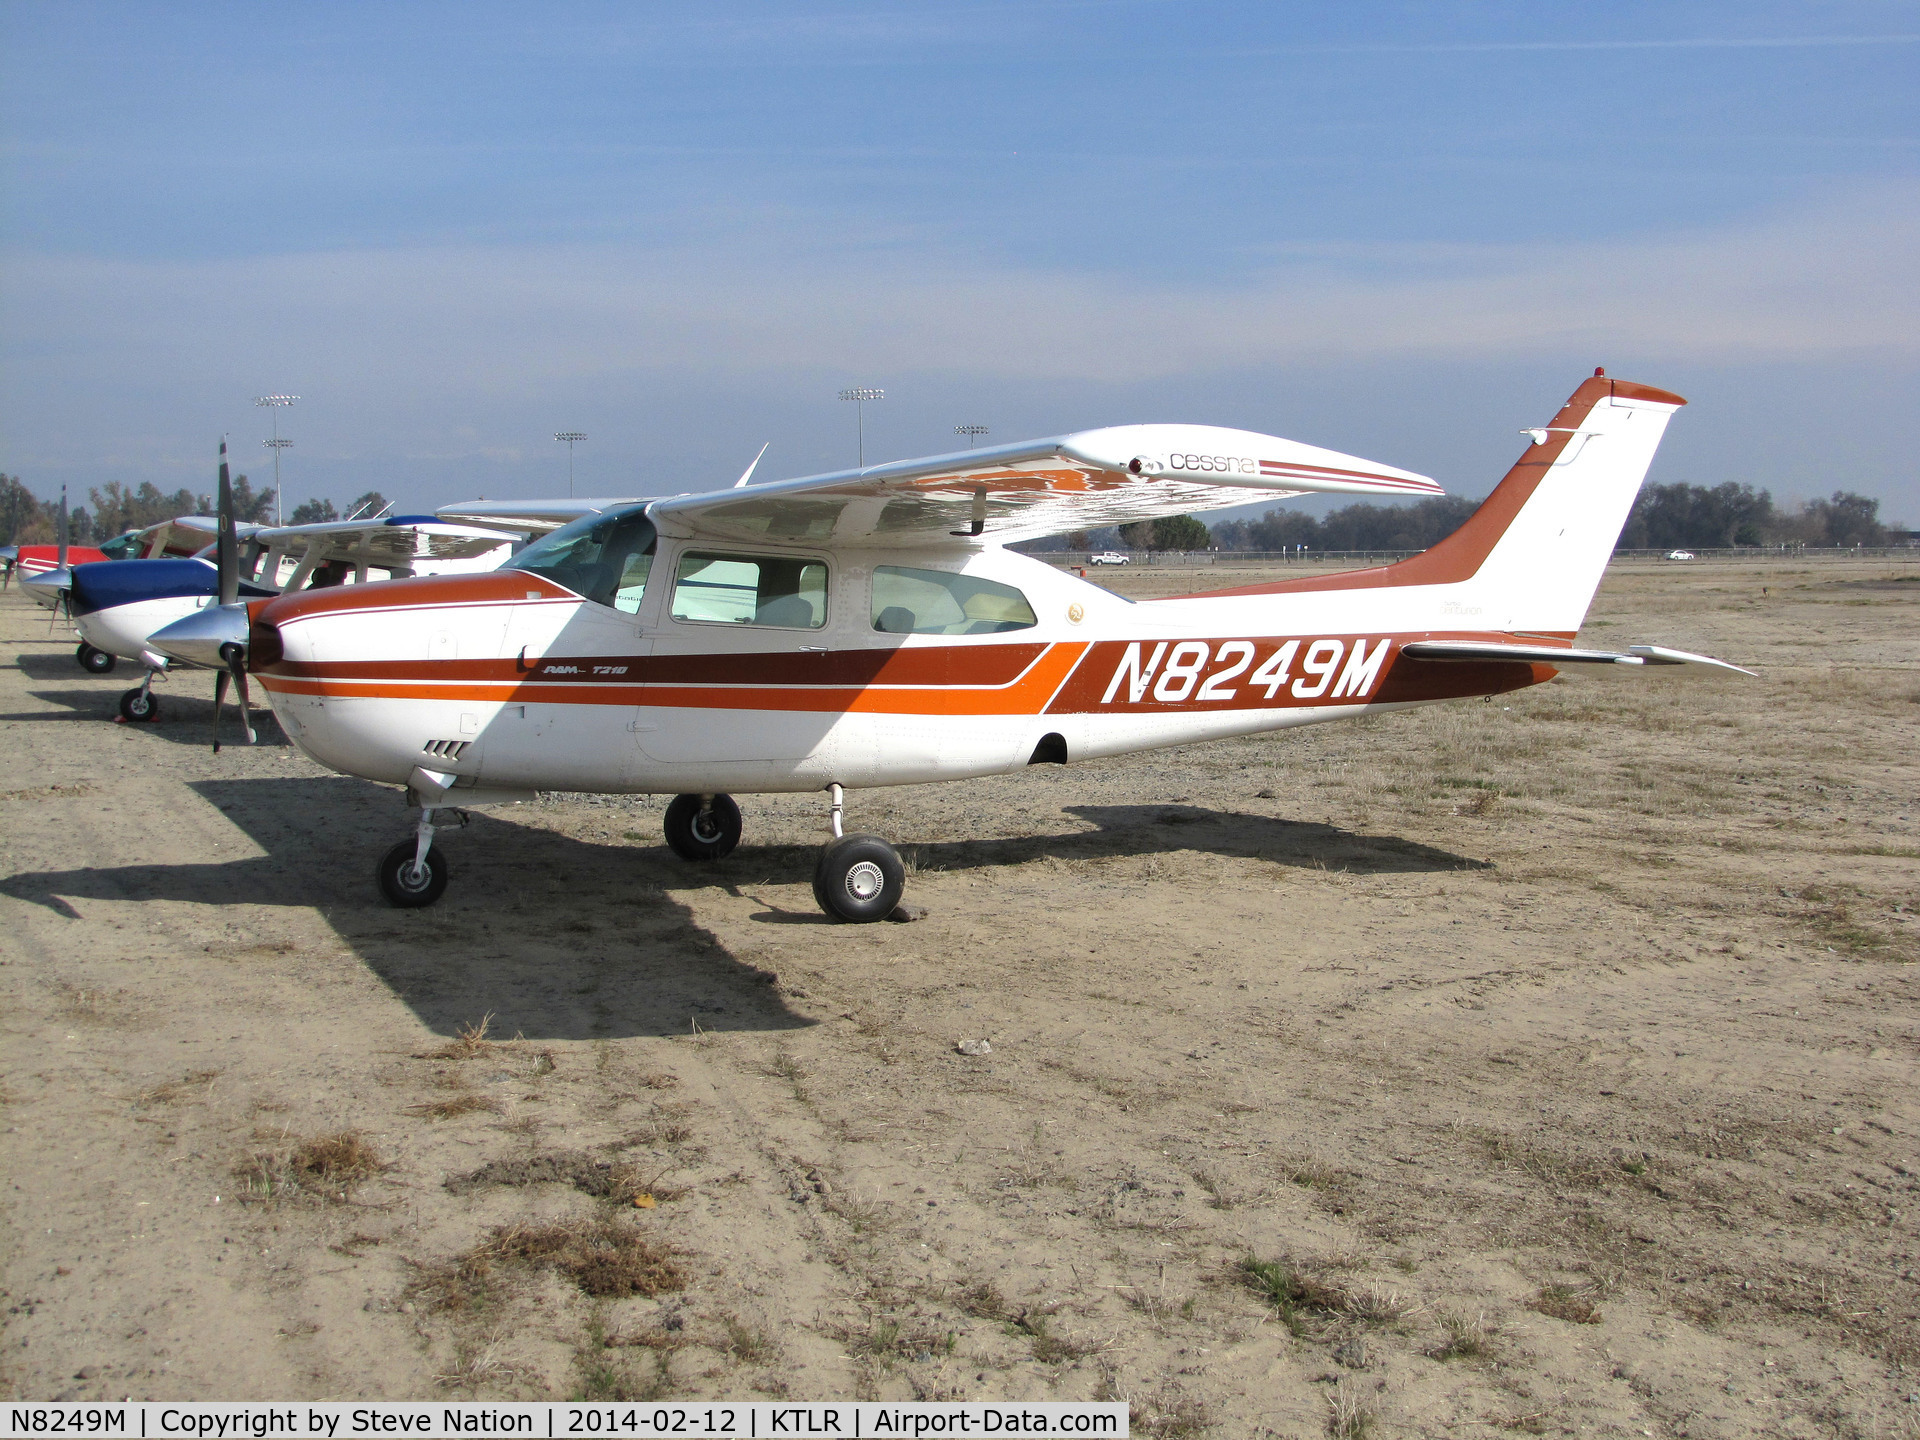 N8249M, 1977 Cessna T210M Turbo Centurion C/N 21062039, privately-owned Cessna T210M from Camarillo, CA @ Mefford Field (Tulare, CA) for 2014 International Ag Expo